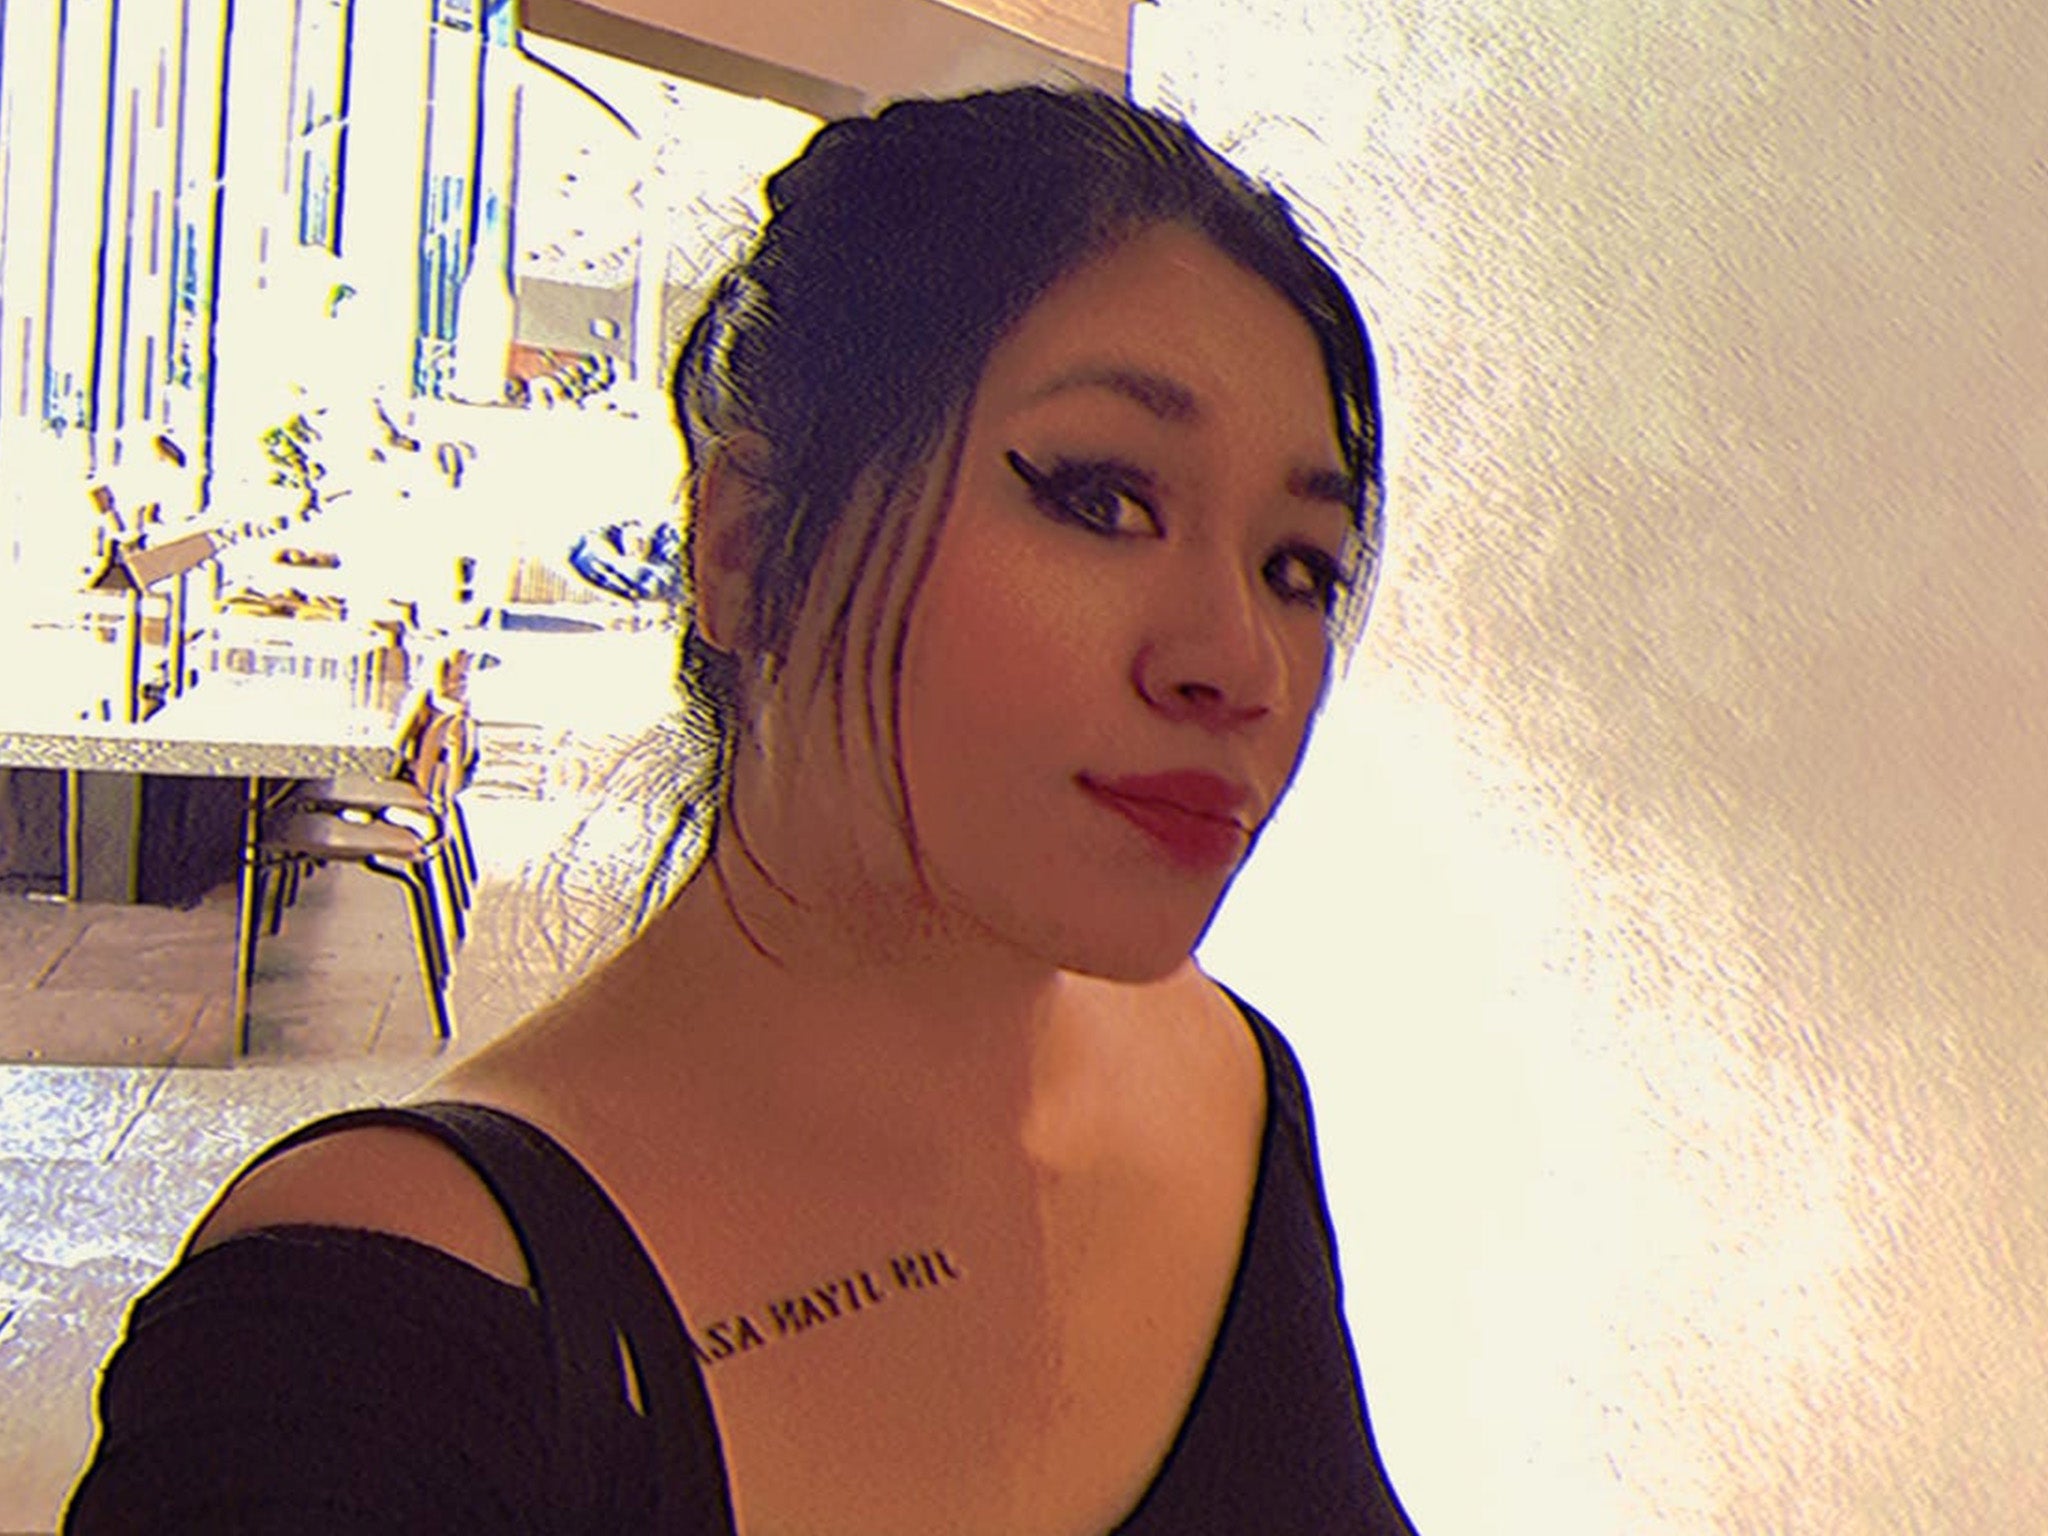 Akane Allison, 43, was diagnosed with premenstrual dysphoric disorder in March 2019